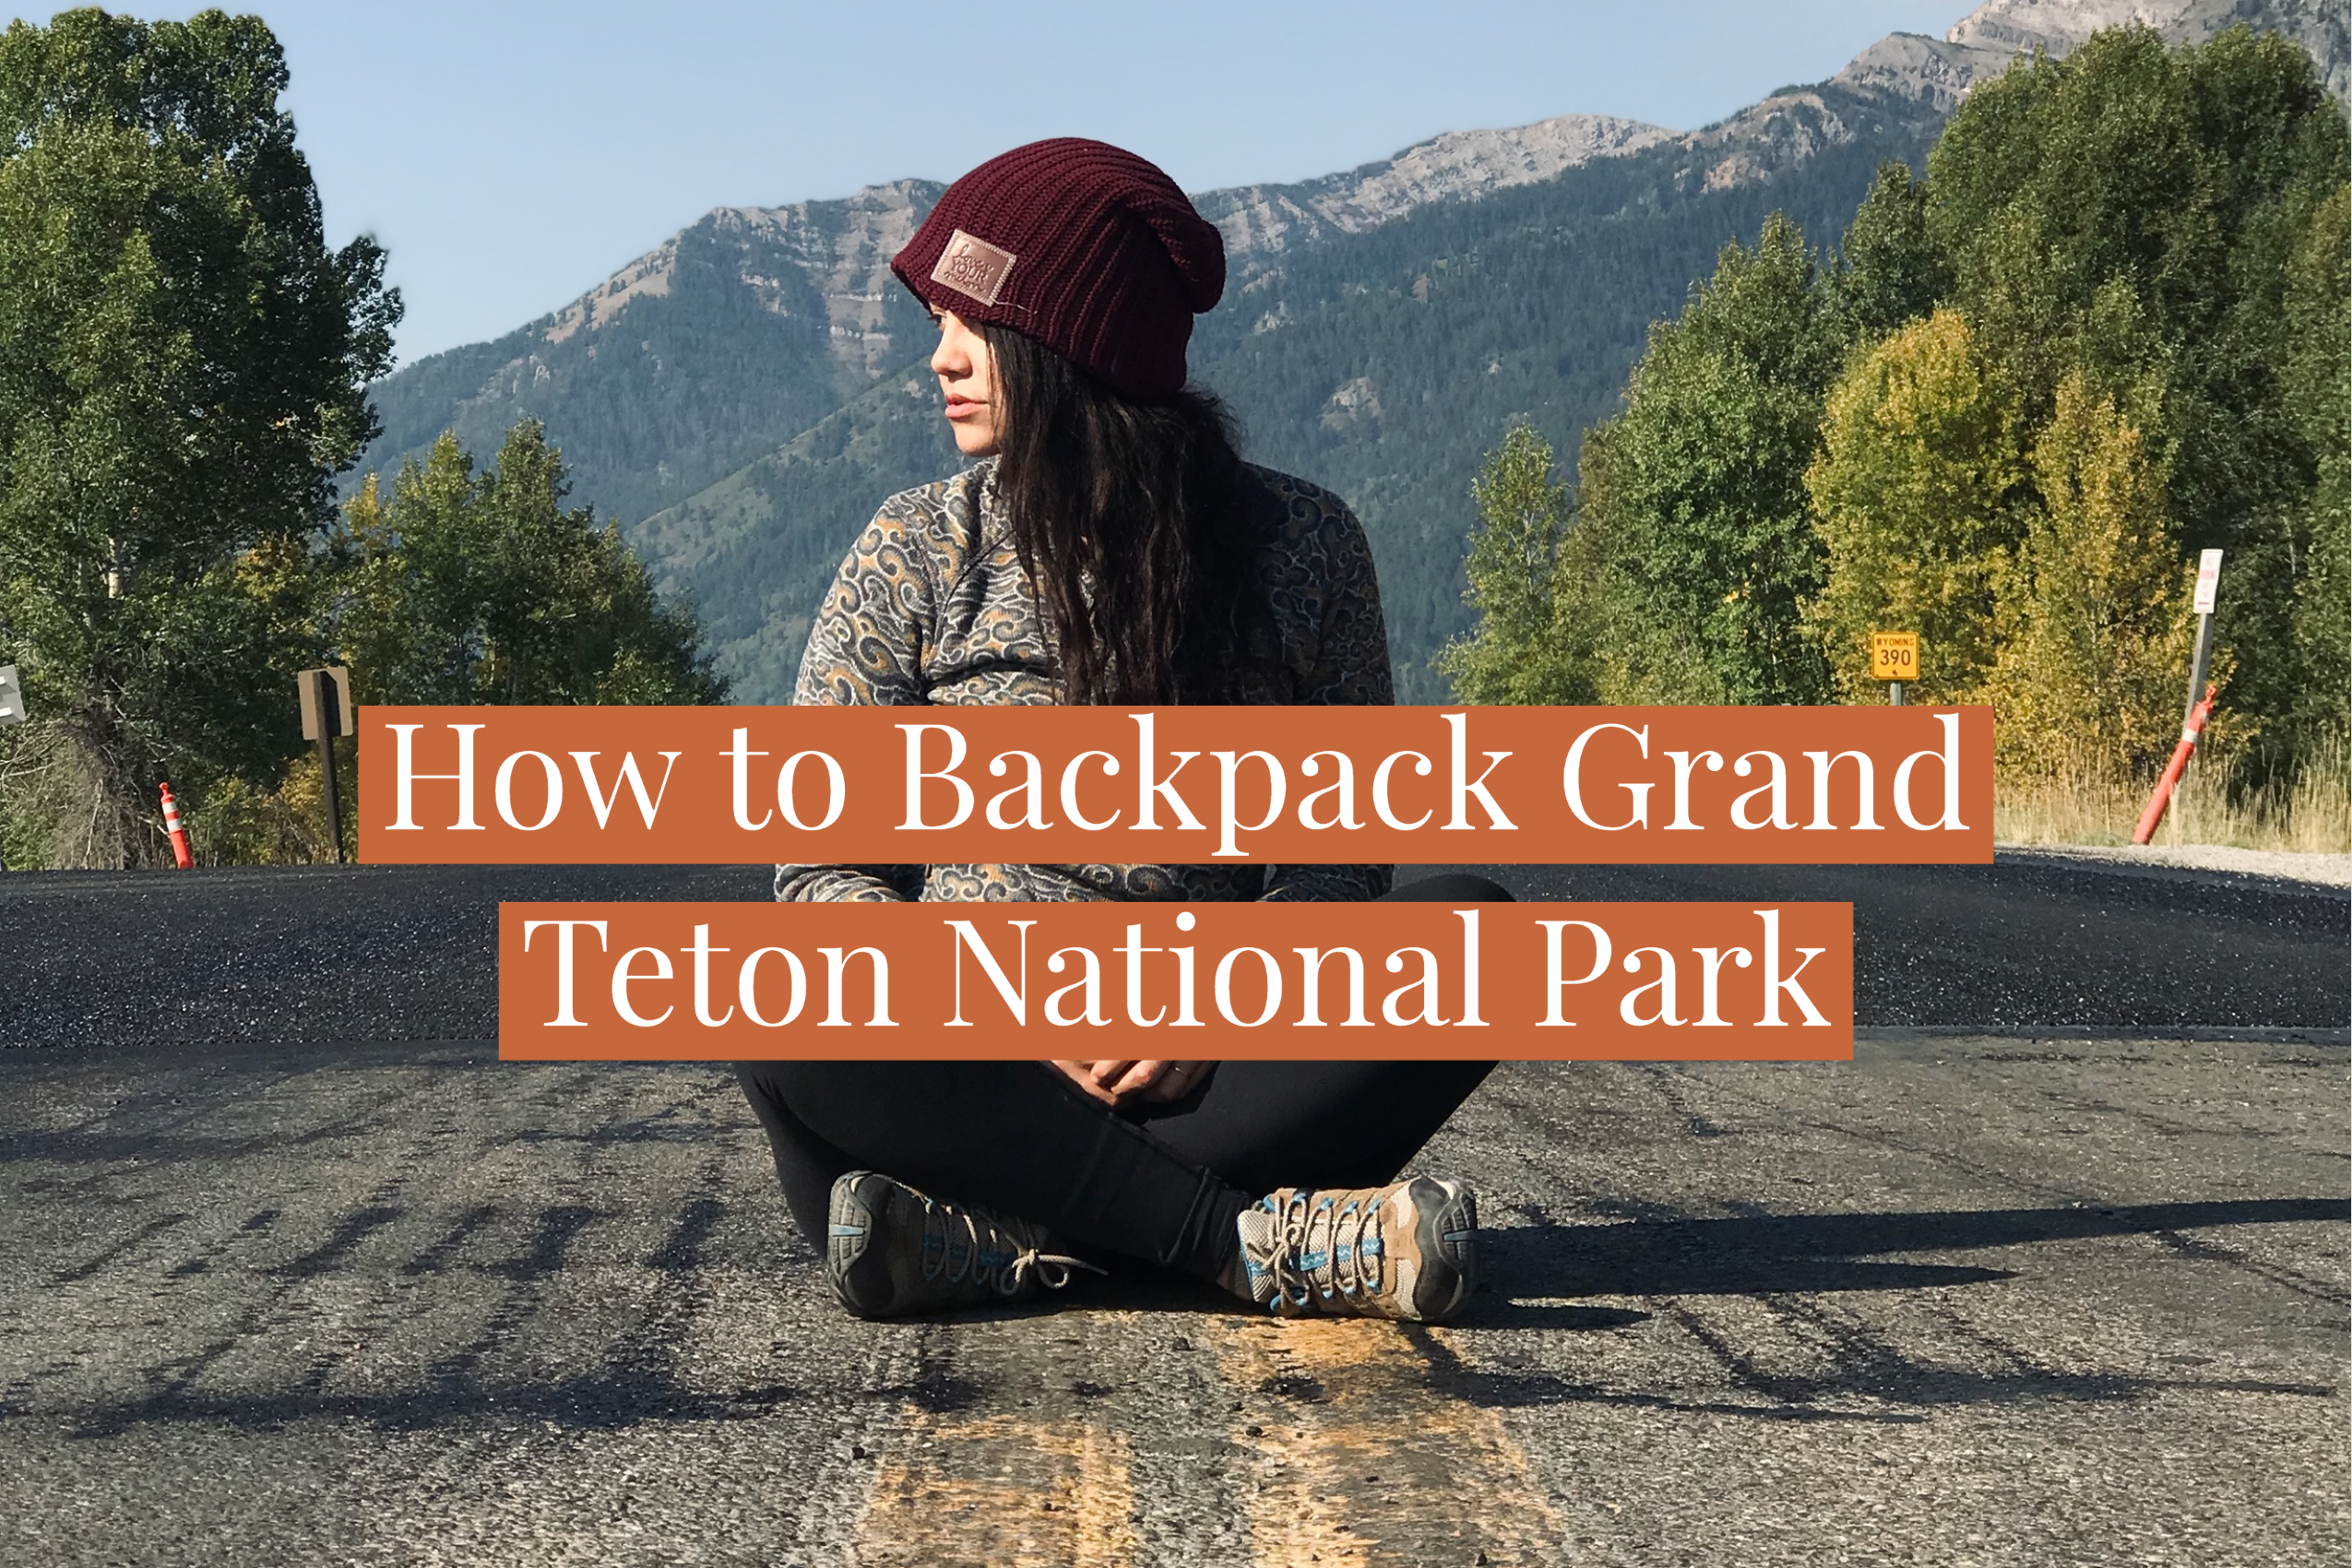 How to Backpack Grand Teton National Park, Ashley Gabrielle Travel and adventure blog